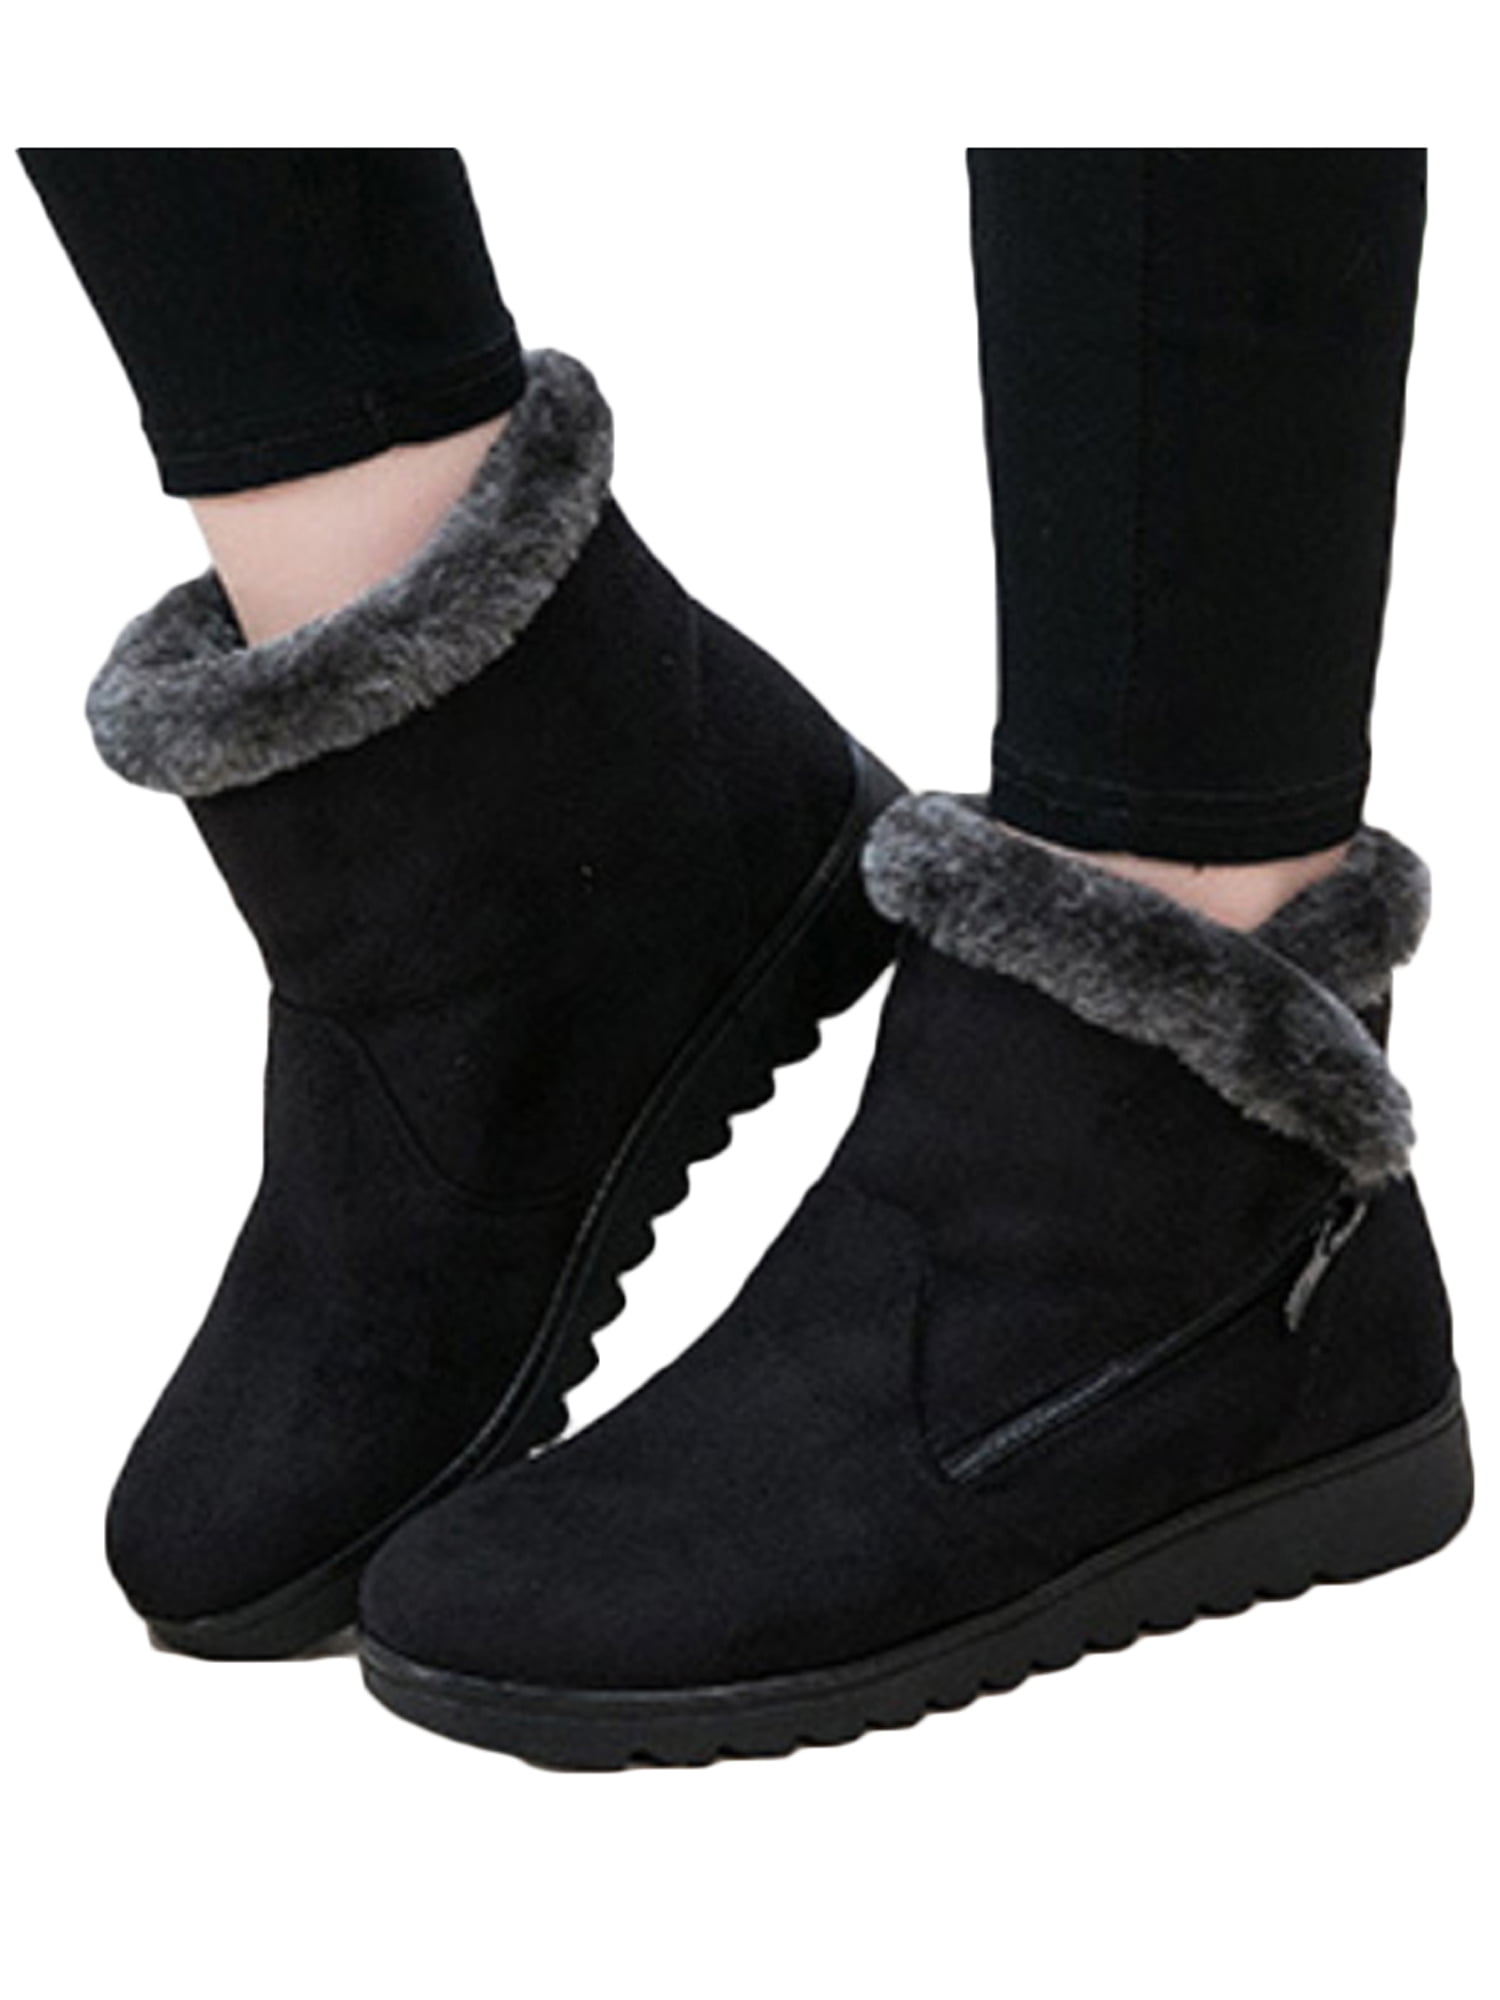 Women's Winter Warm Fur Lined Sneaker Boots Casual Suede Slip On Ankle Booties 